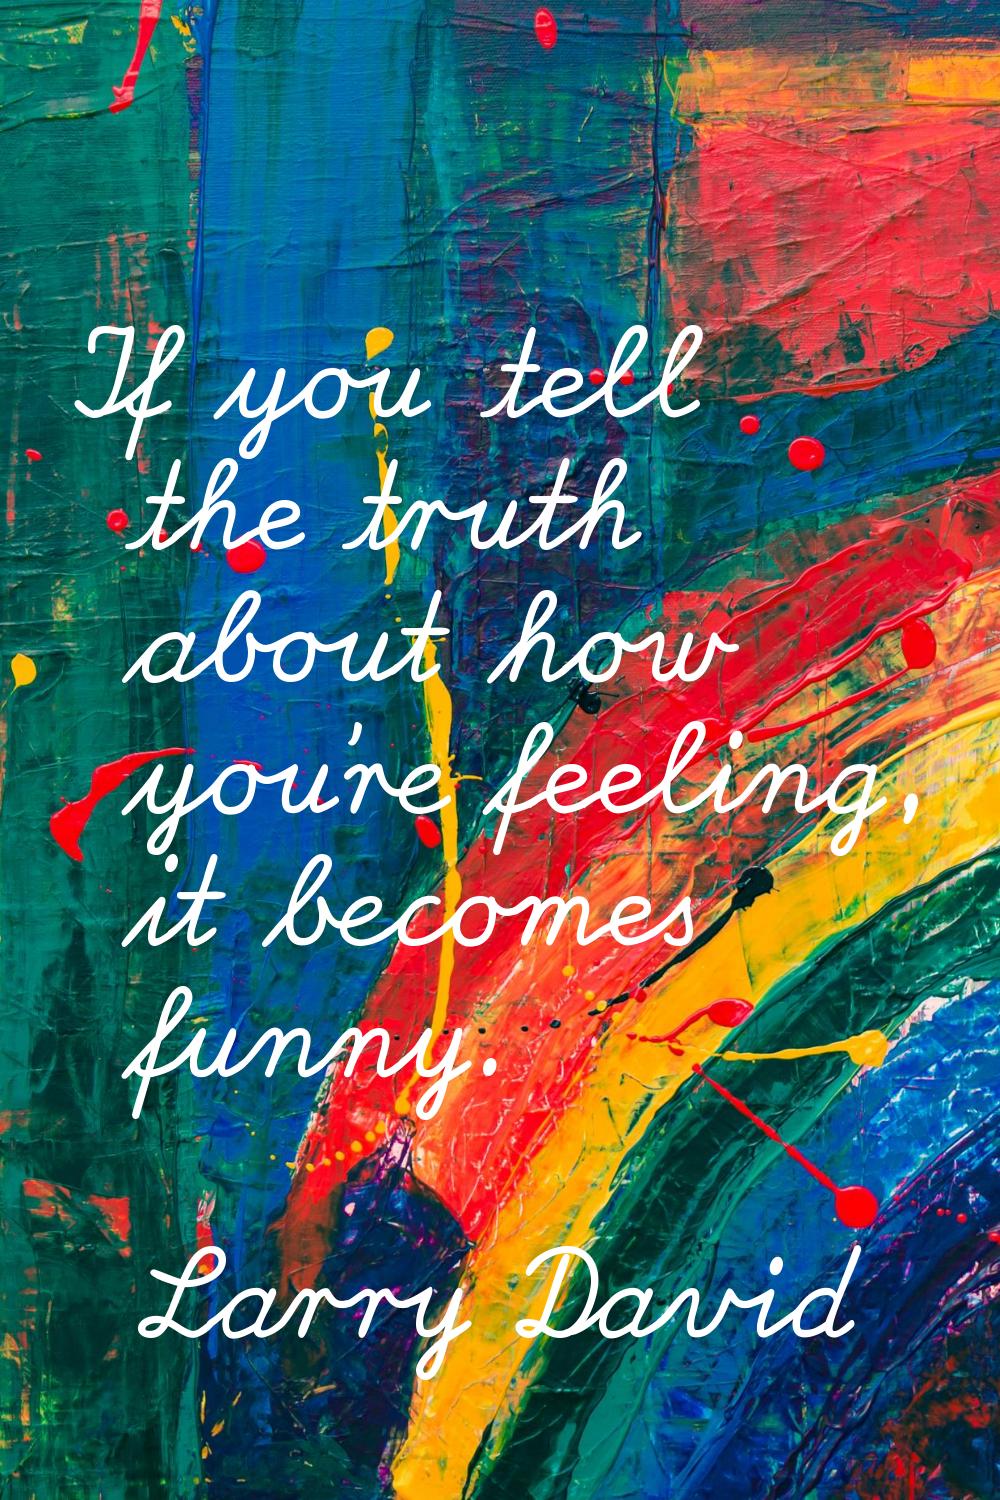 If you tell the truth about how you're feeling, it becomes funny.